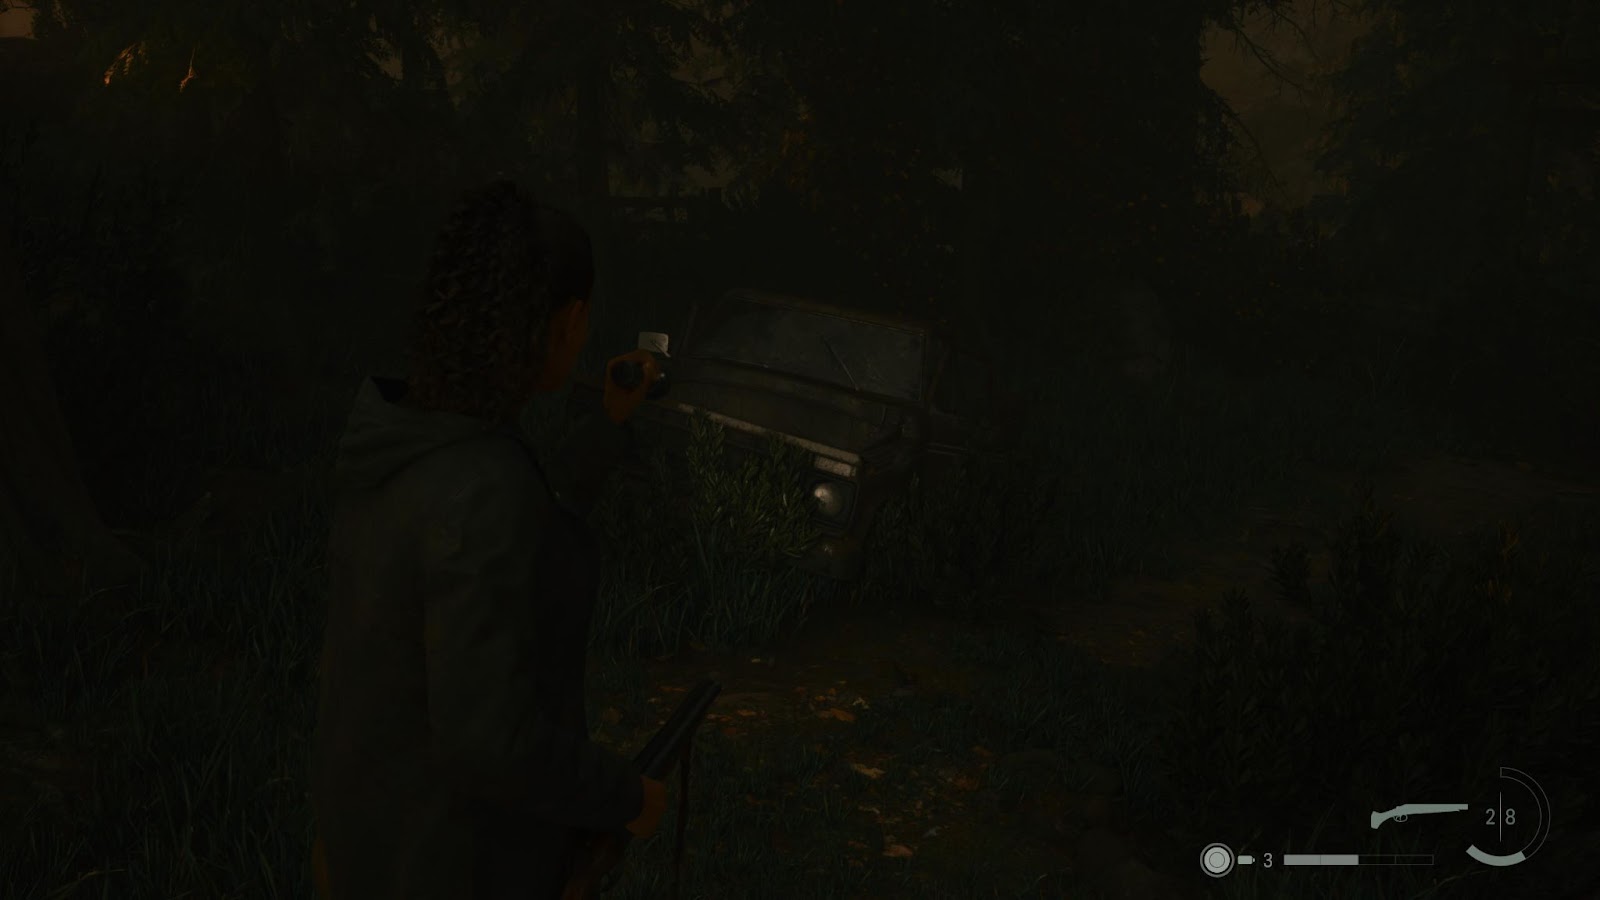 An in game screenshot of the old truck in the rental cabins area in Cauldron Lake from Alan Wake 2